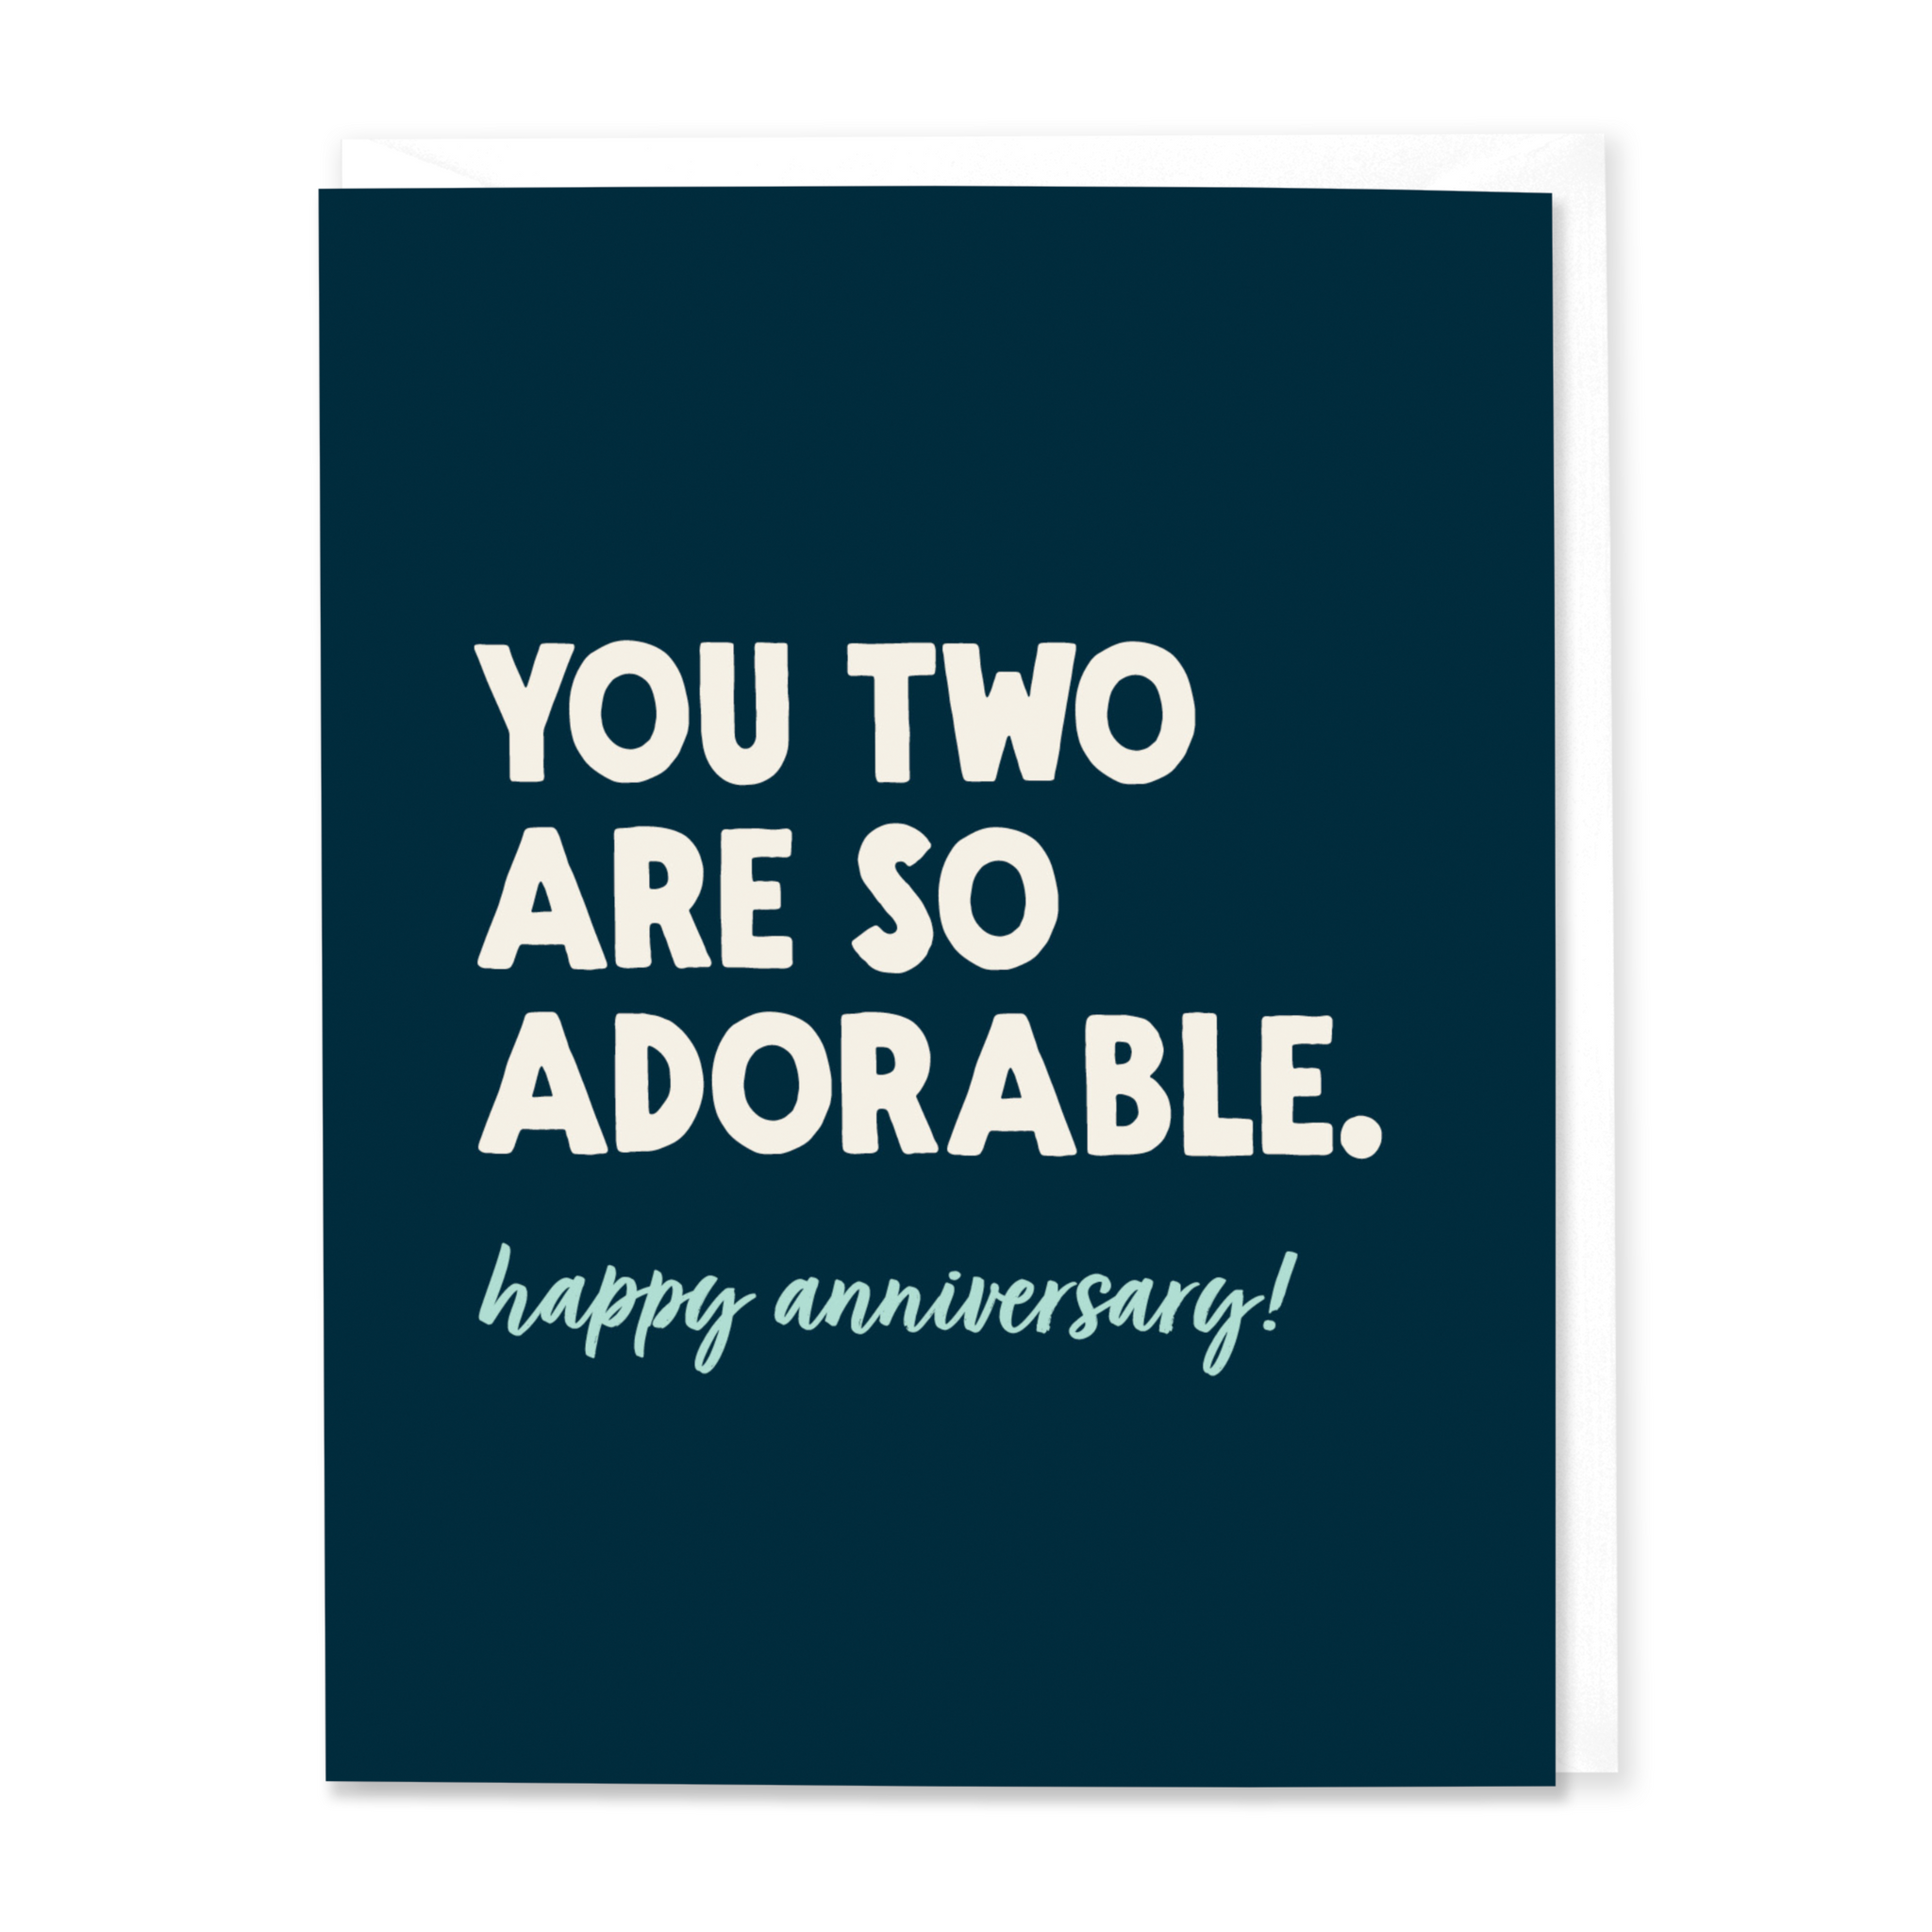 You Two Are So Adorable Anniversary